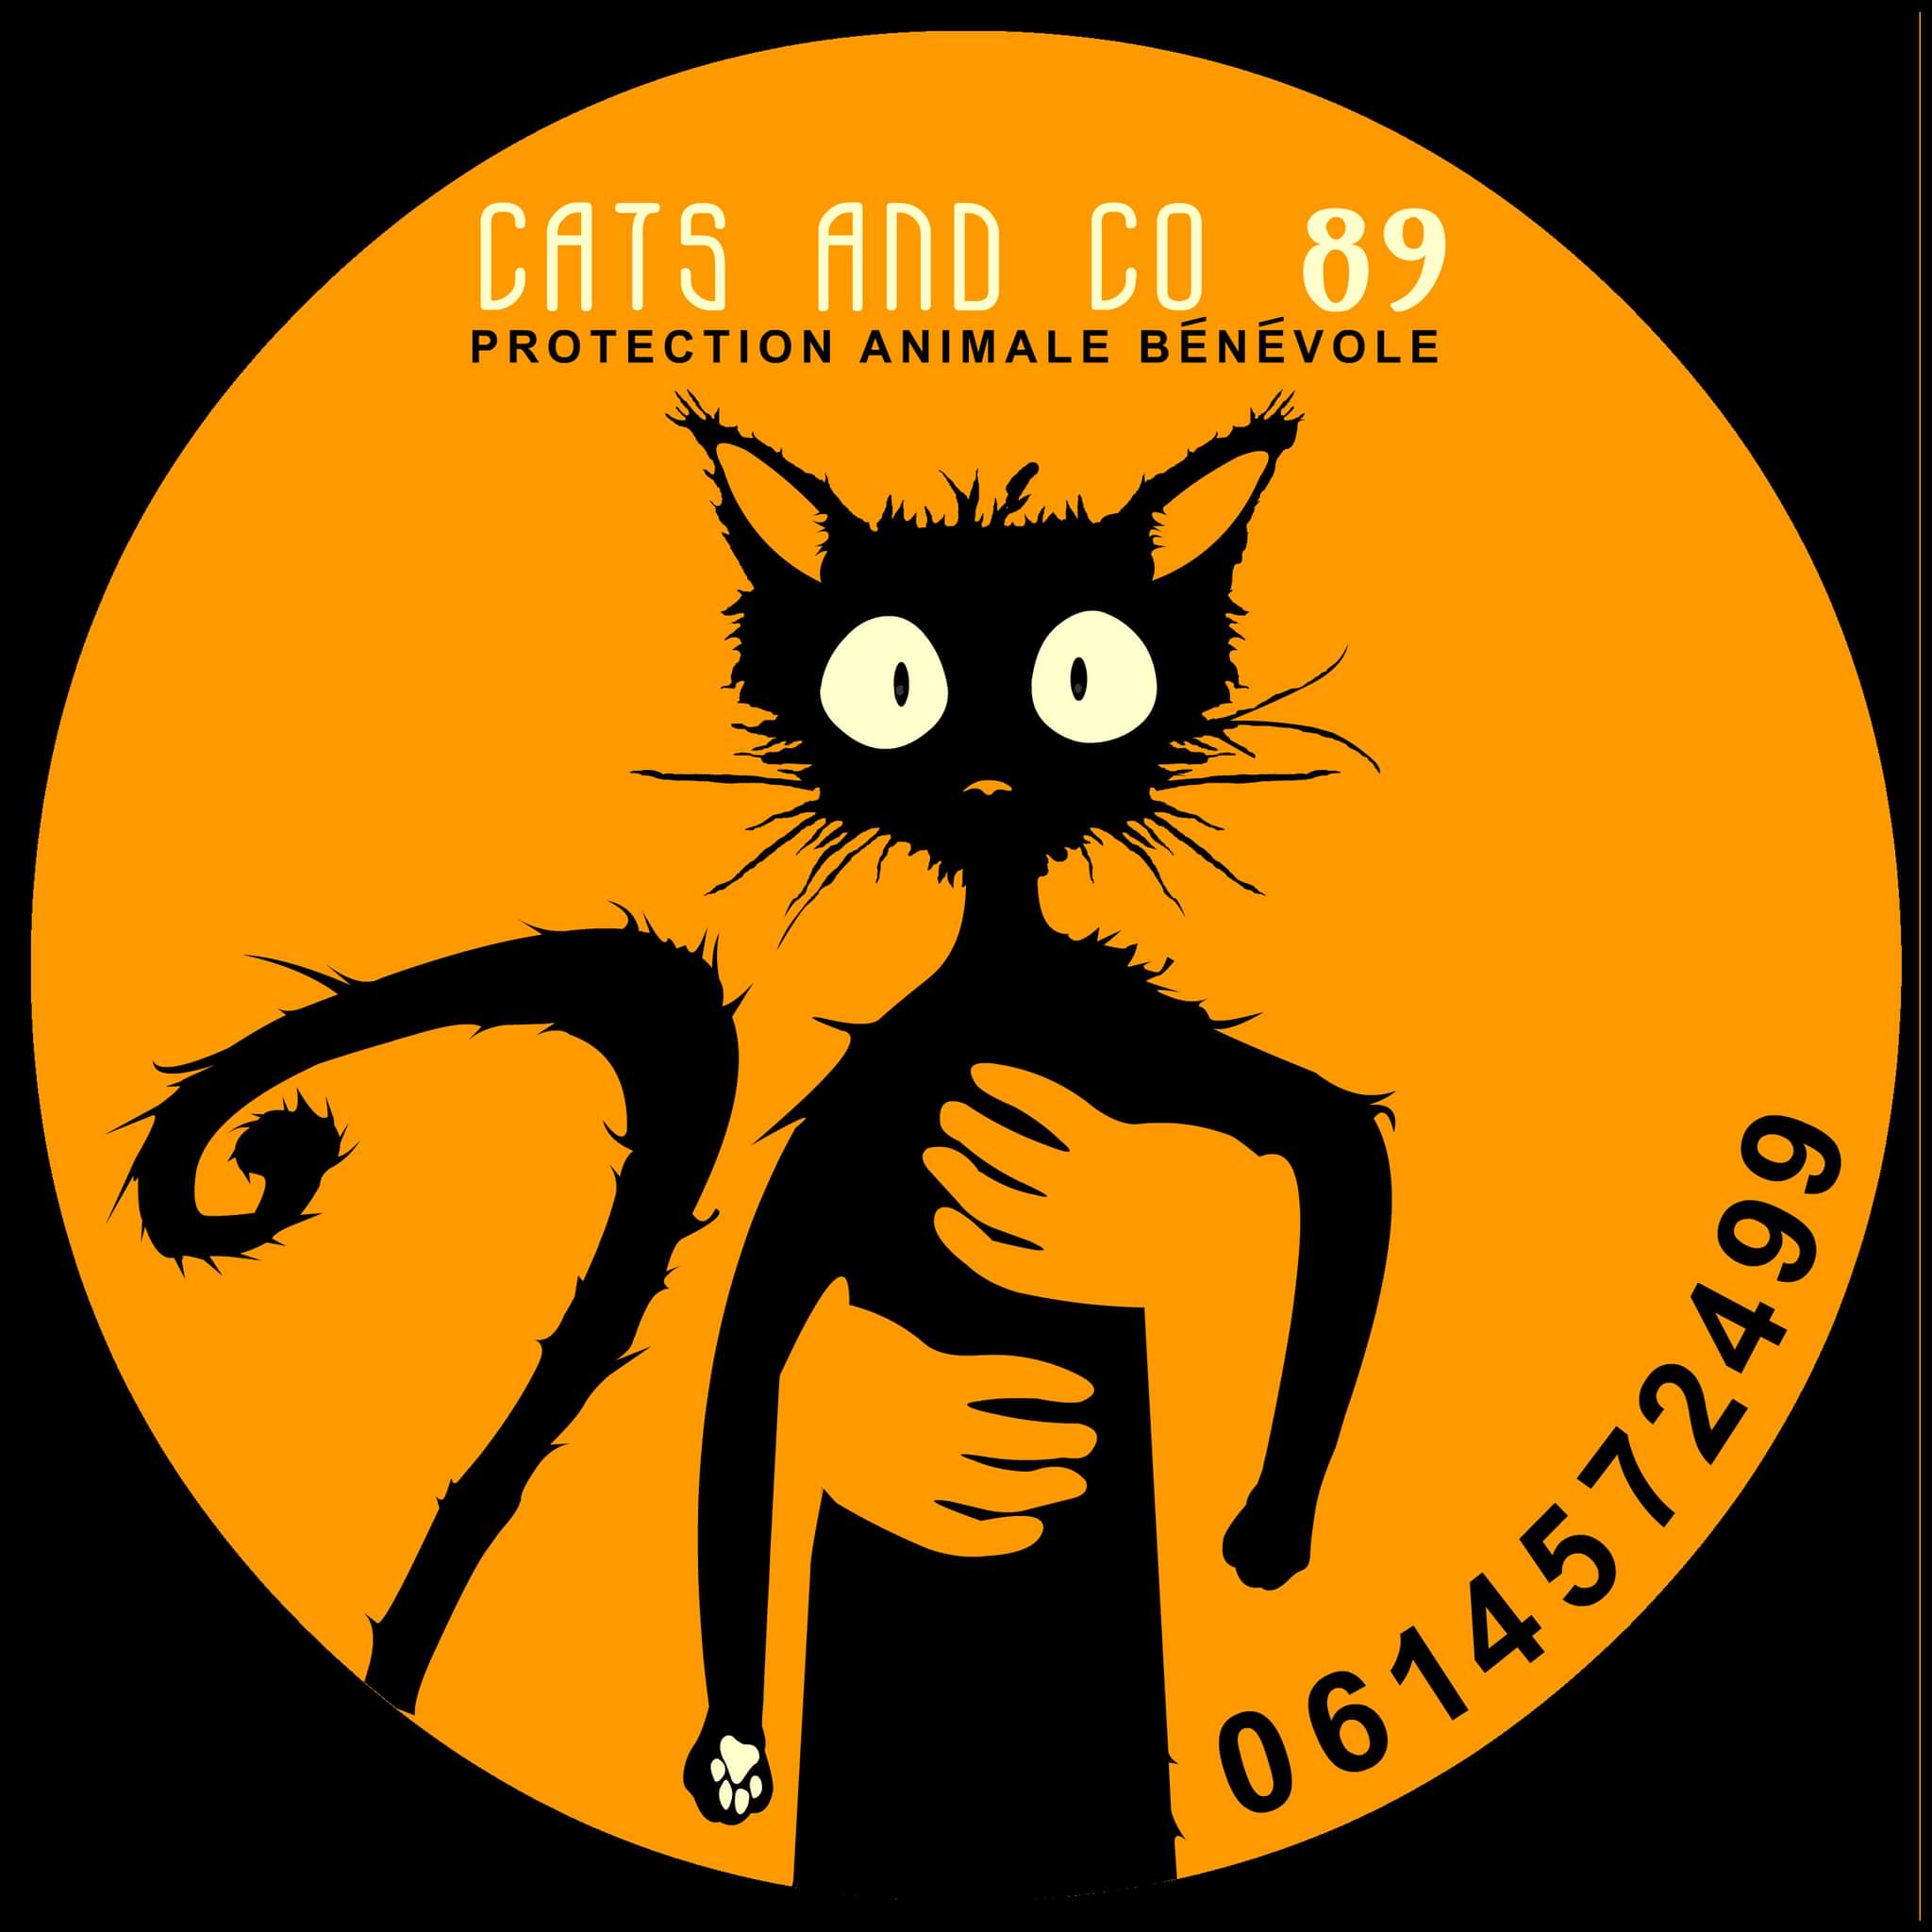 Cats and co 89